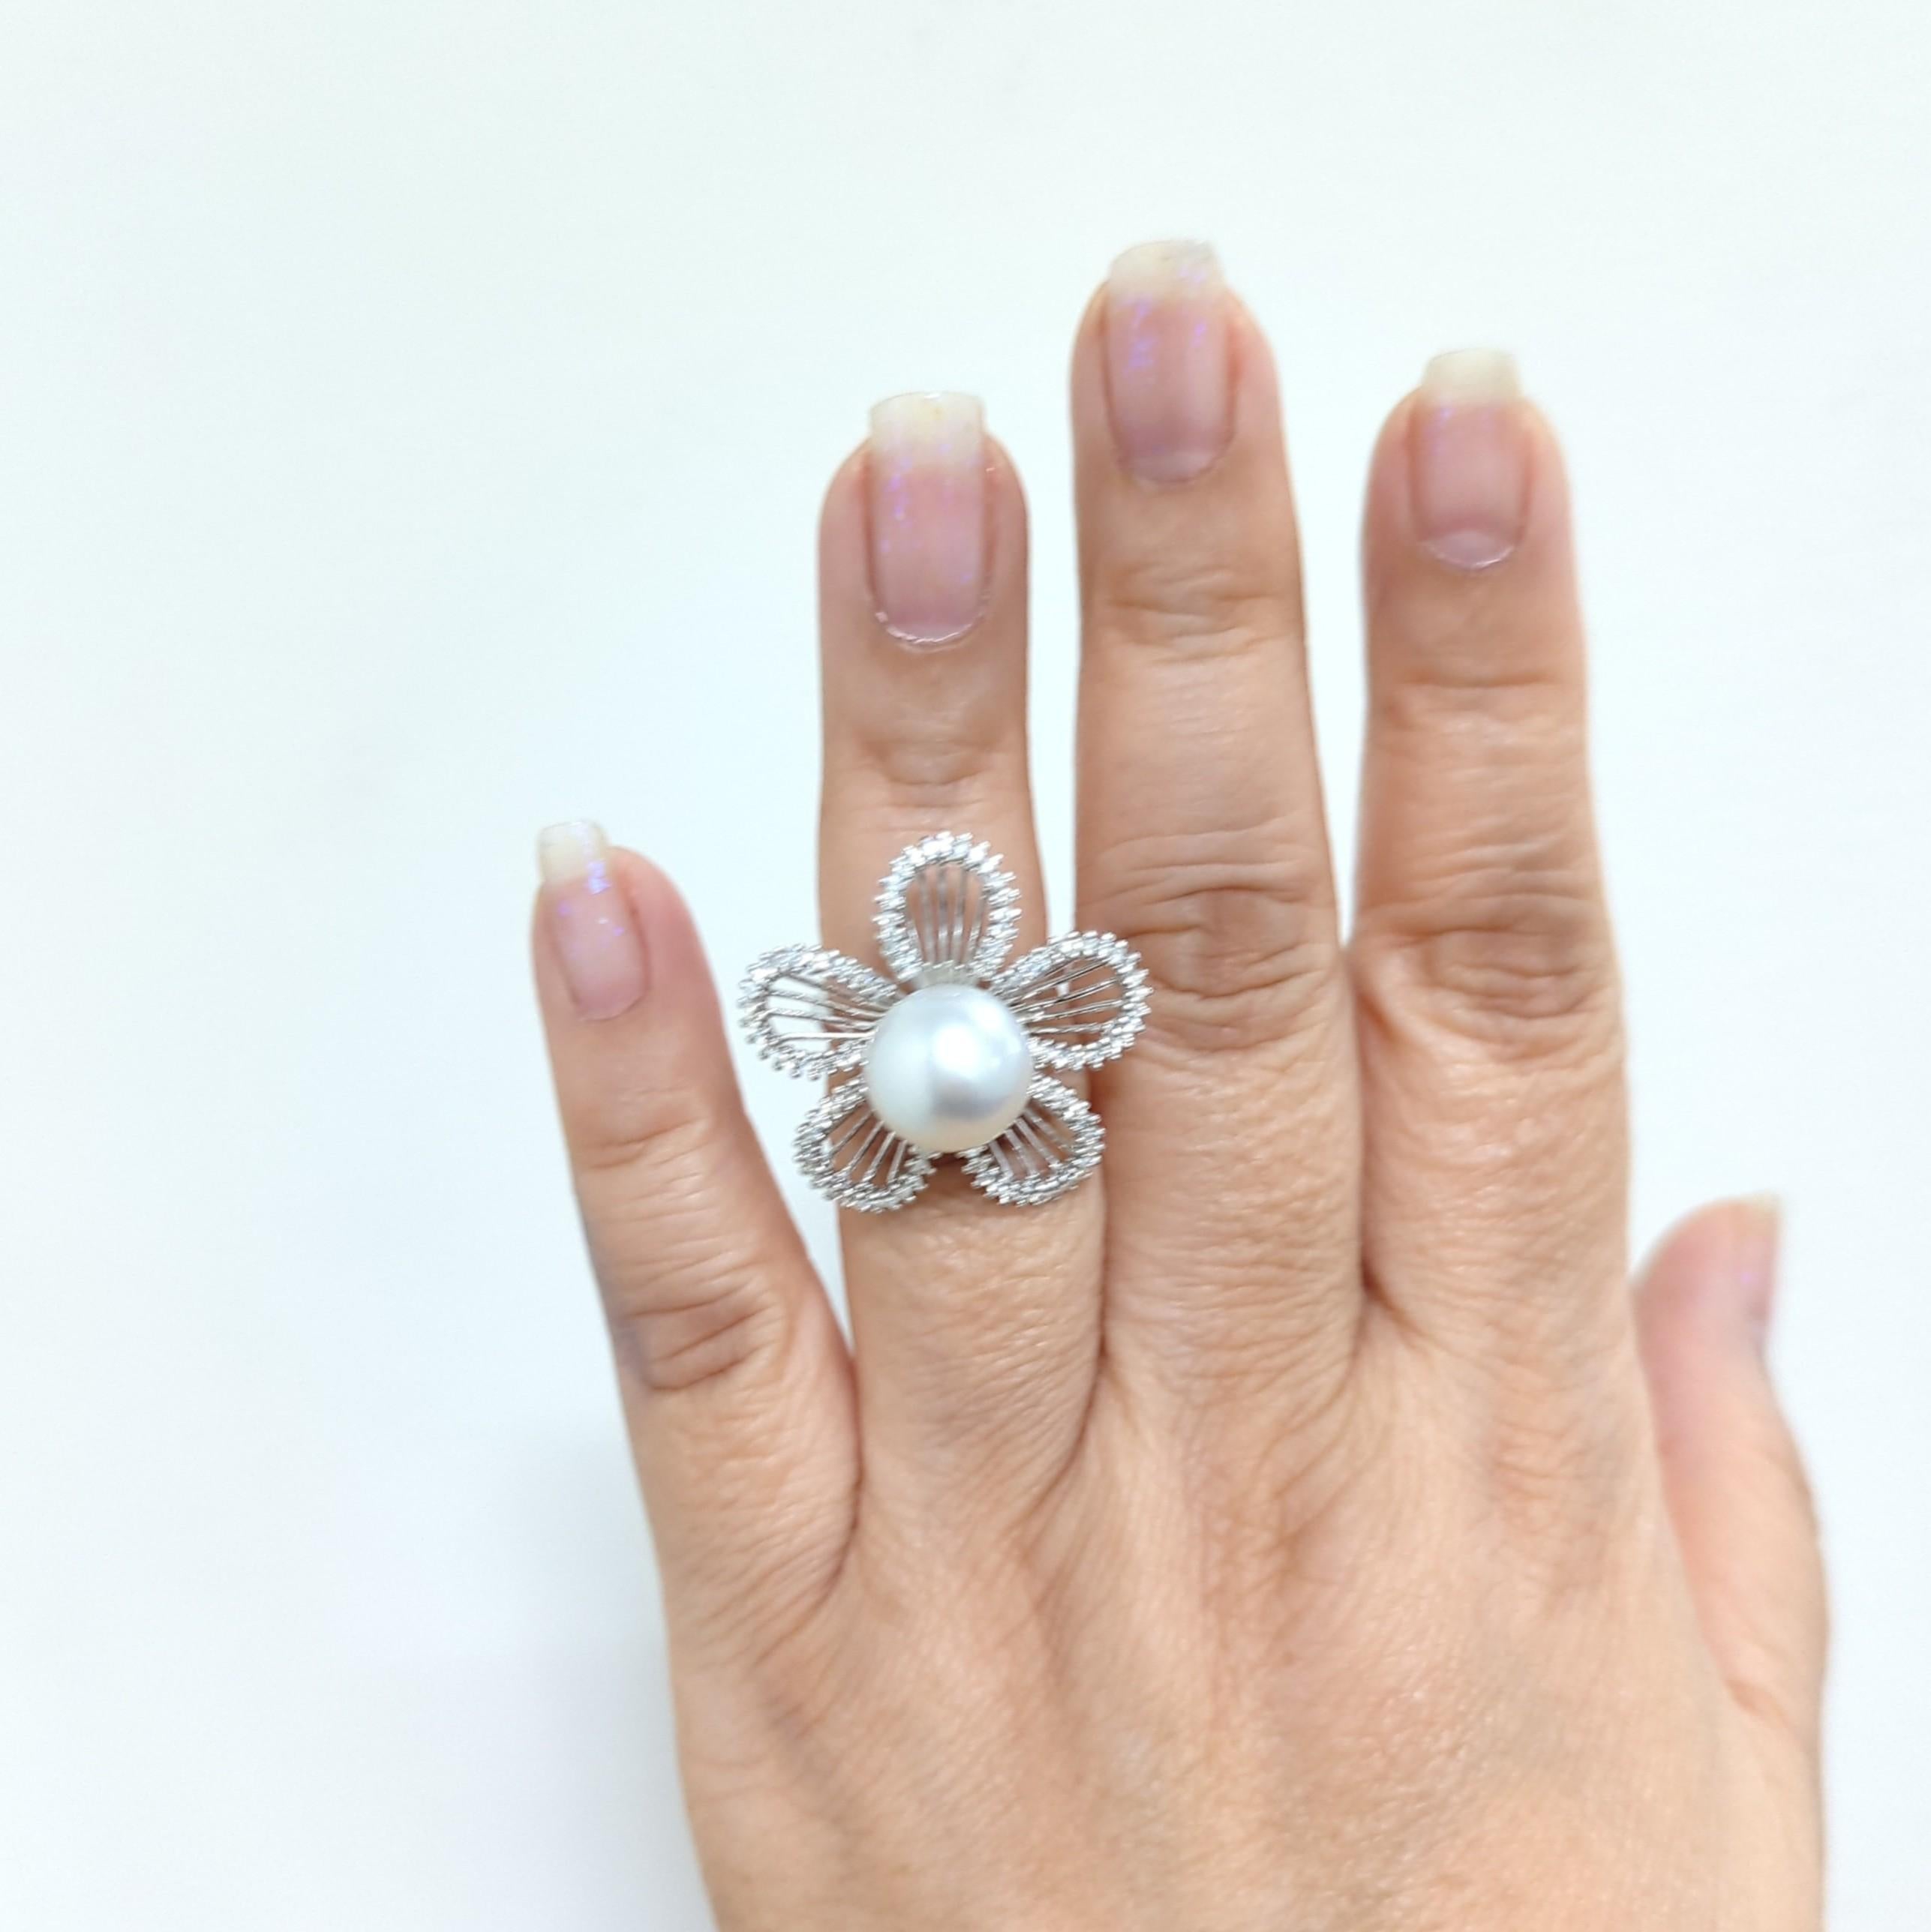 Beautiful cocktail ring with a large white South Sea pearl and good quality white diamond rounds.  Handmade in 18k white gold.  Ring size 6.5.